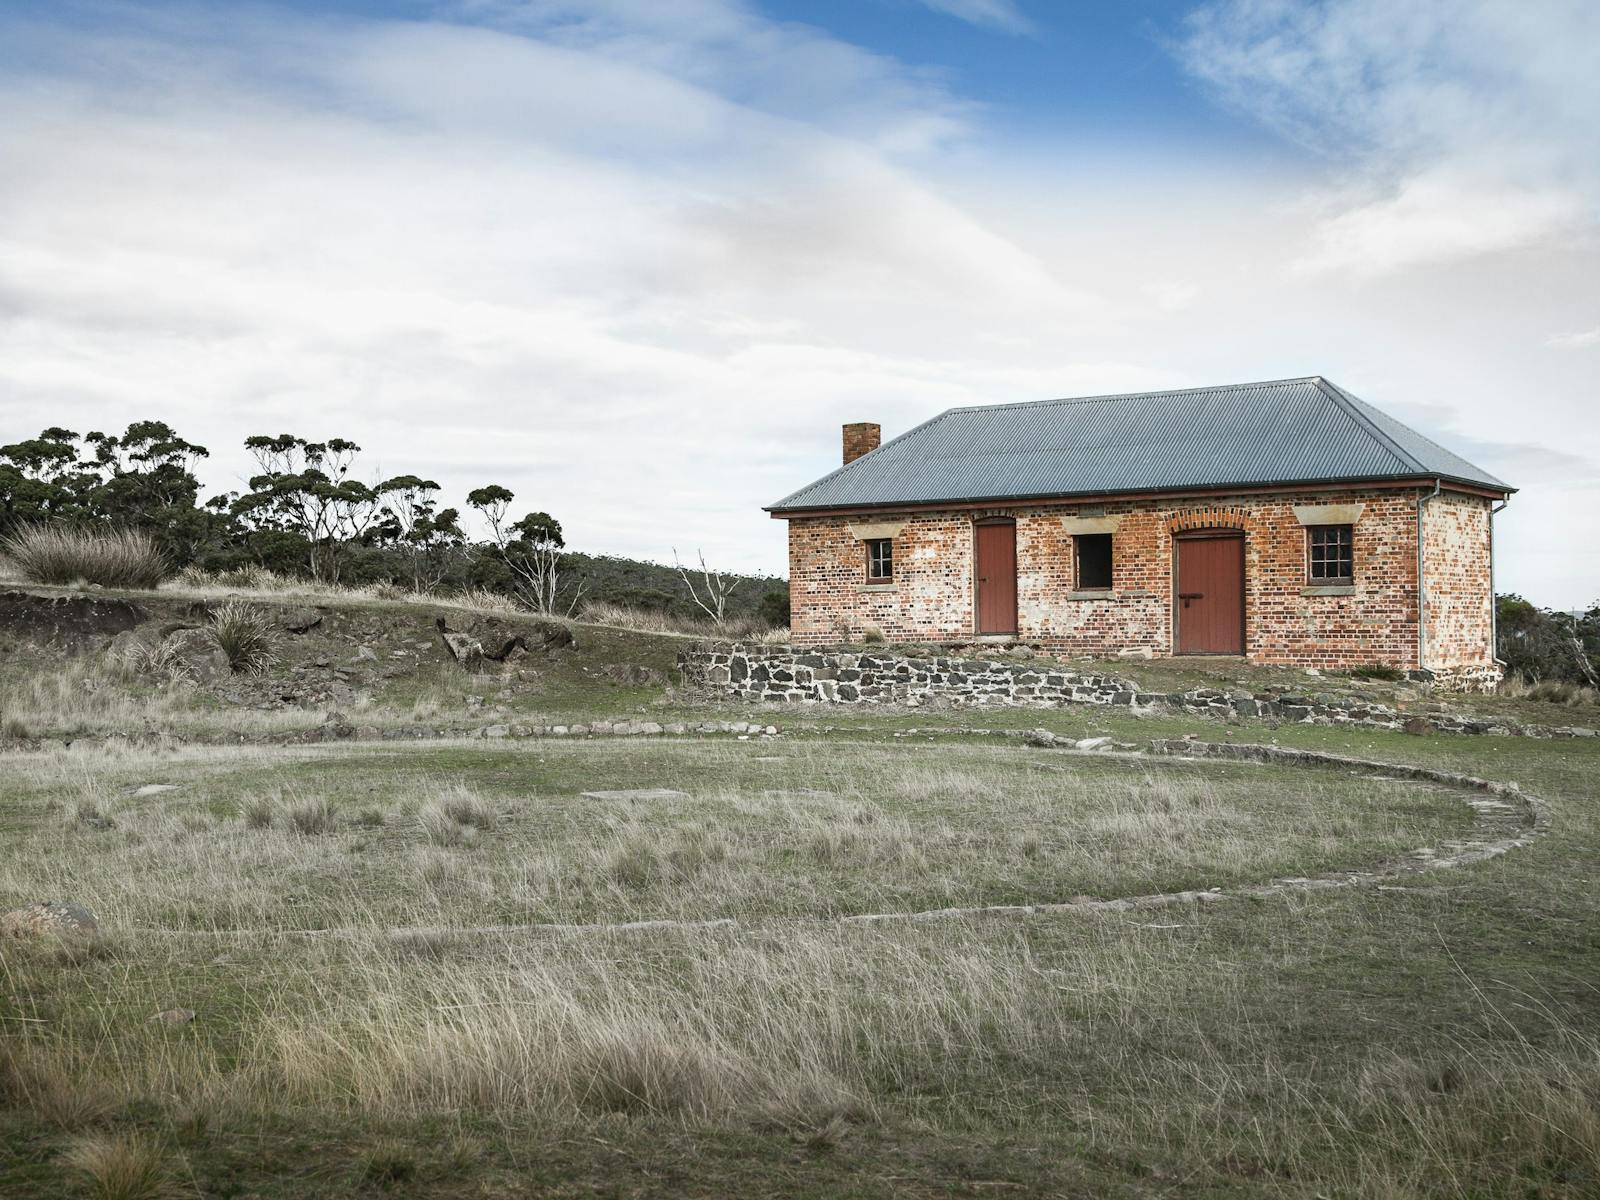 Colonial house (mill house) on sloping hill with dry grass around